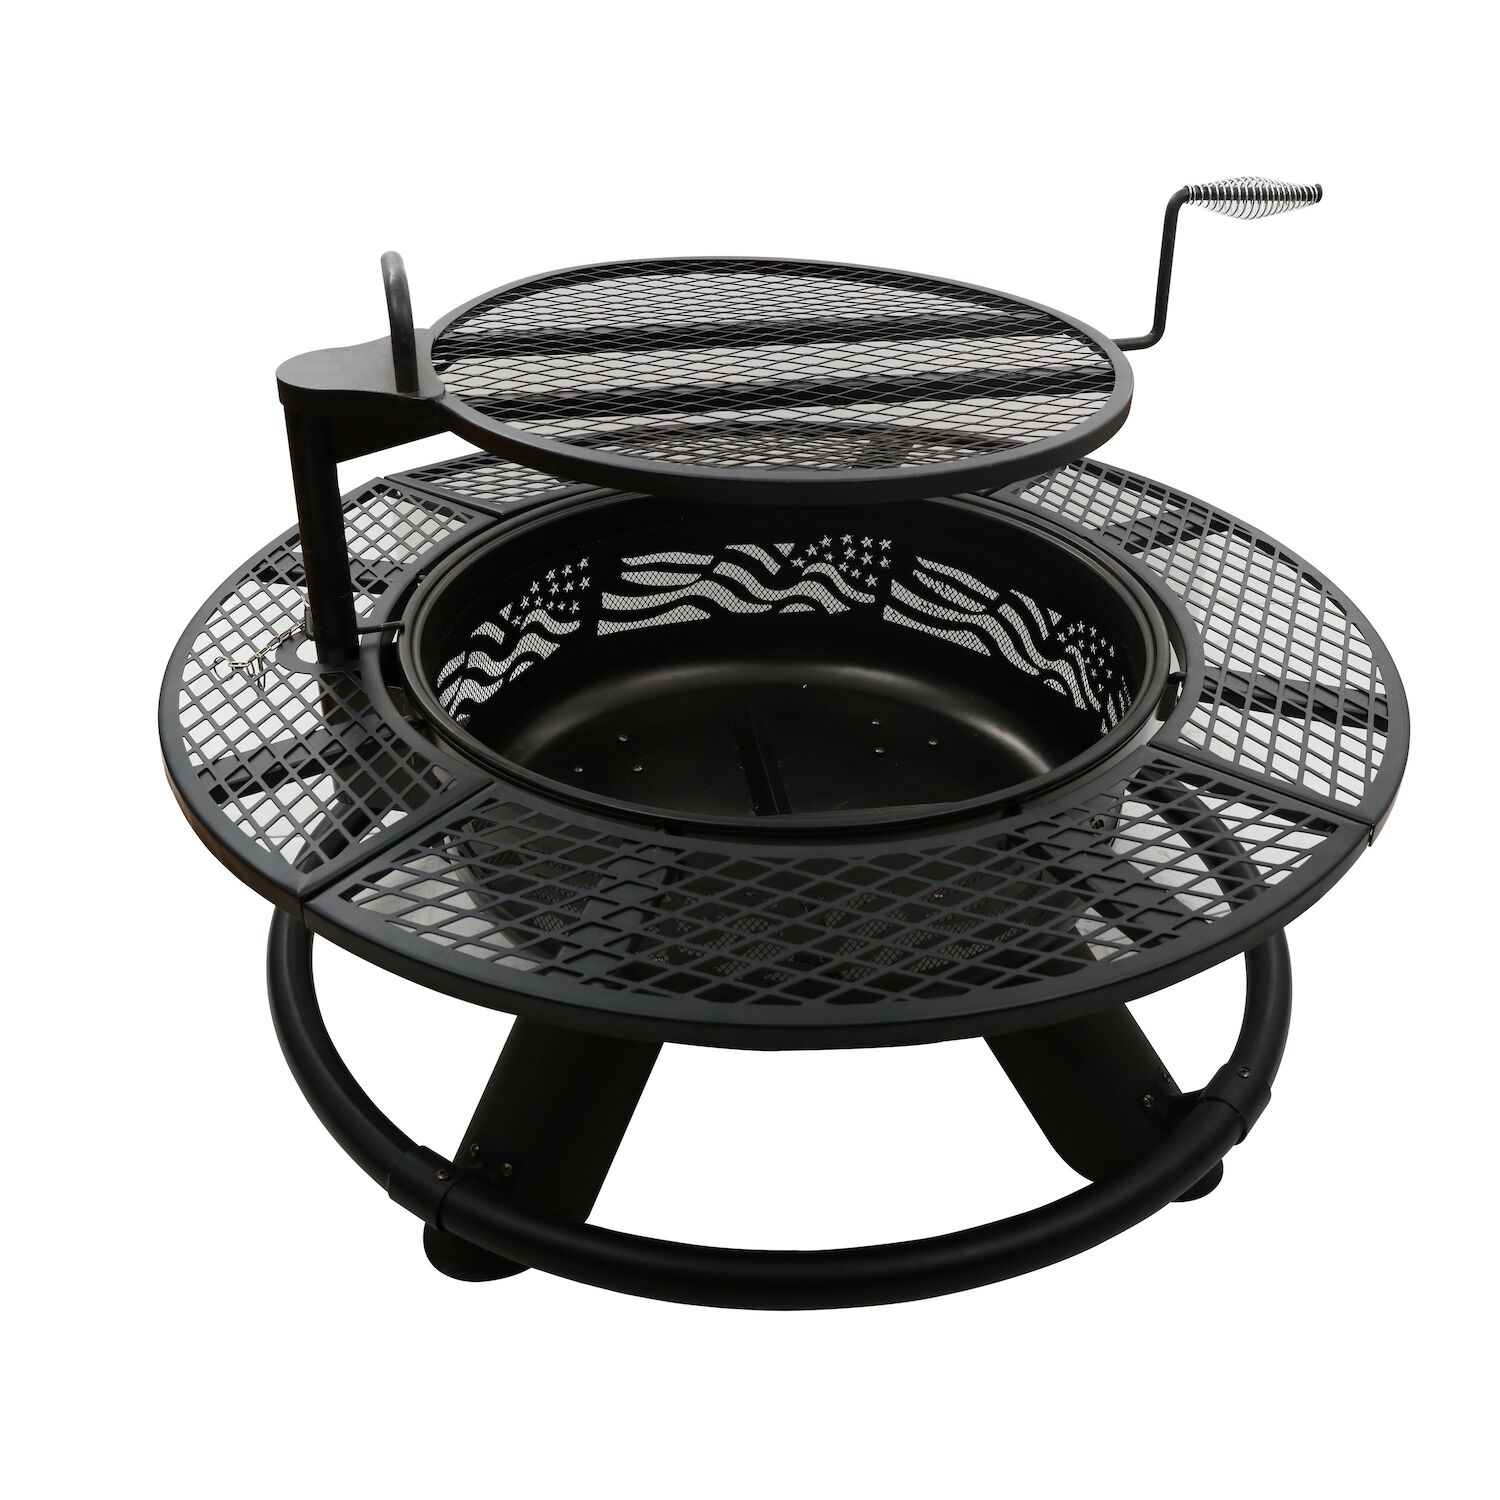 Flag Ranch Fire Pit Pits Big, Big Horn Ranch Fire Pit Reviews